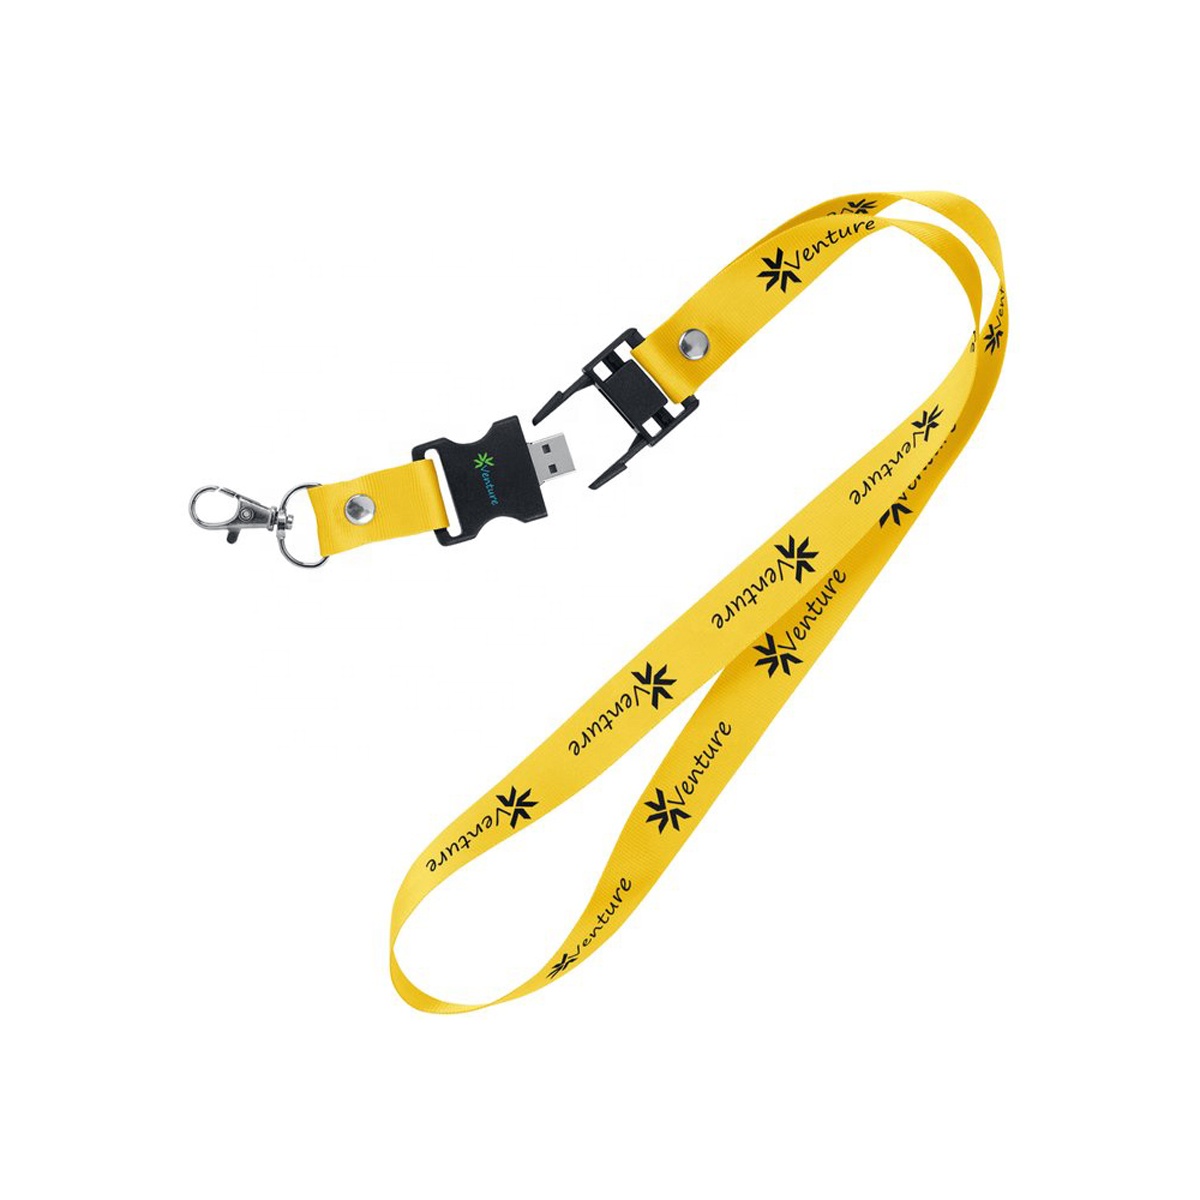 Flash Drive Pack Multicolor Lanyards